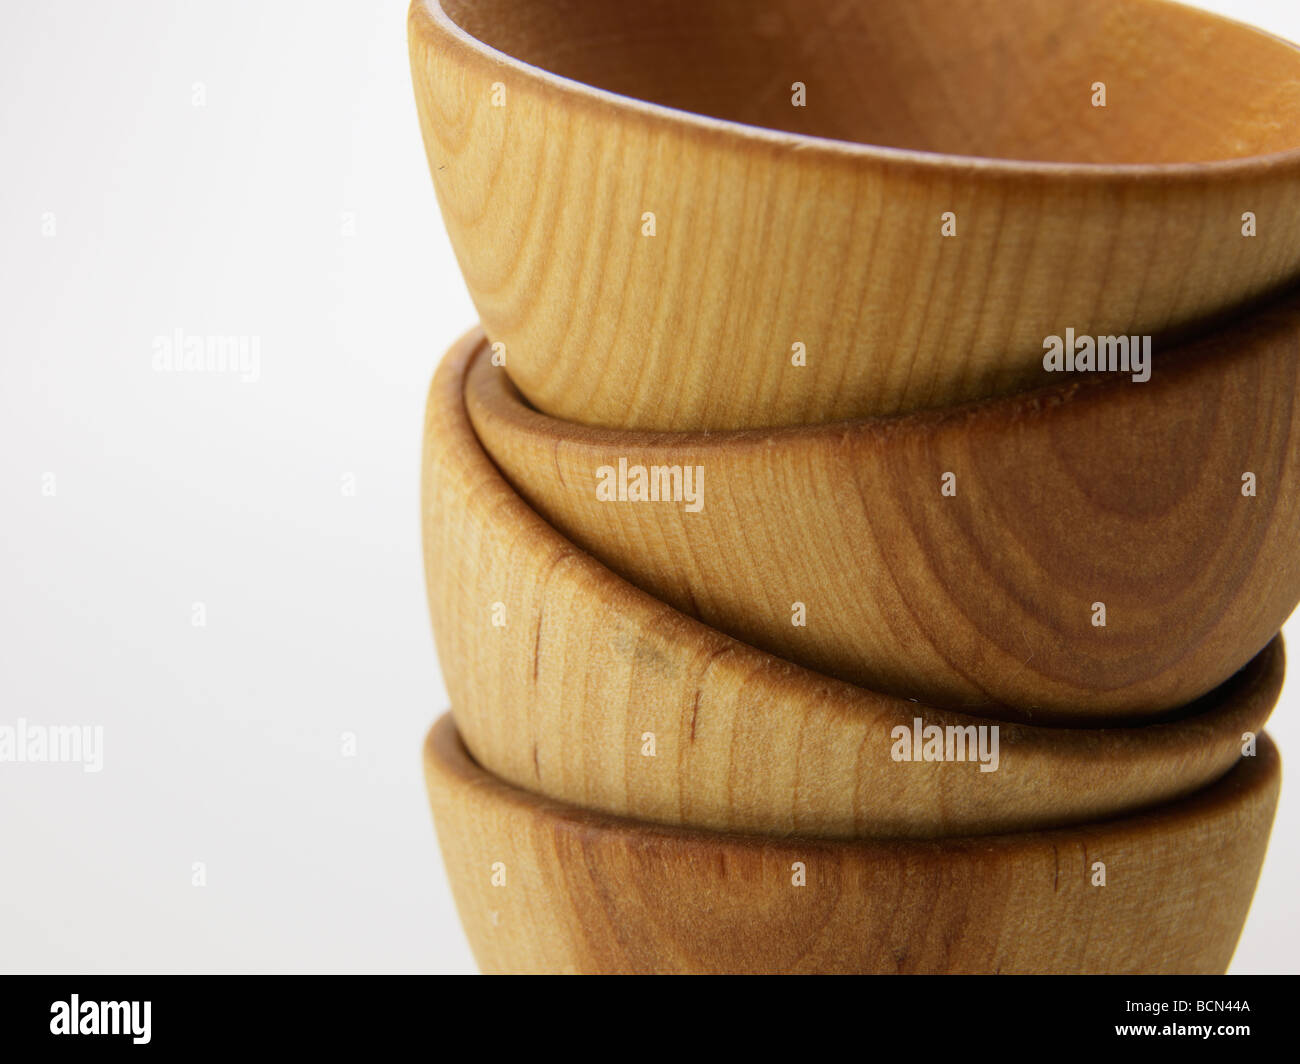 Stack of Four Wooden Bowls Stock Photo